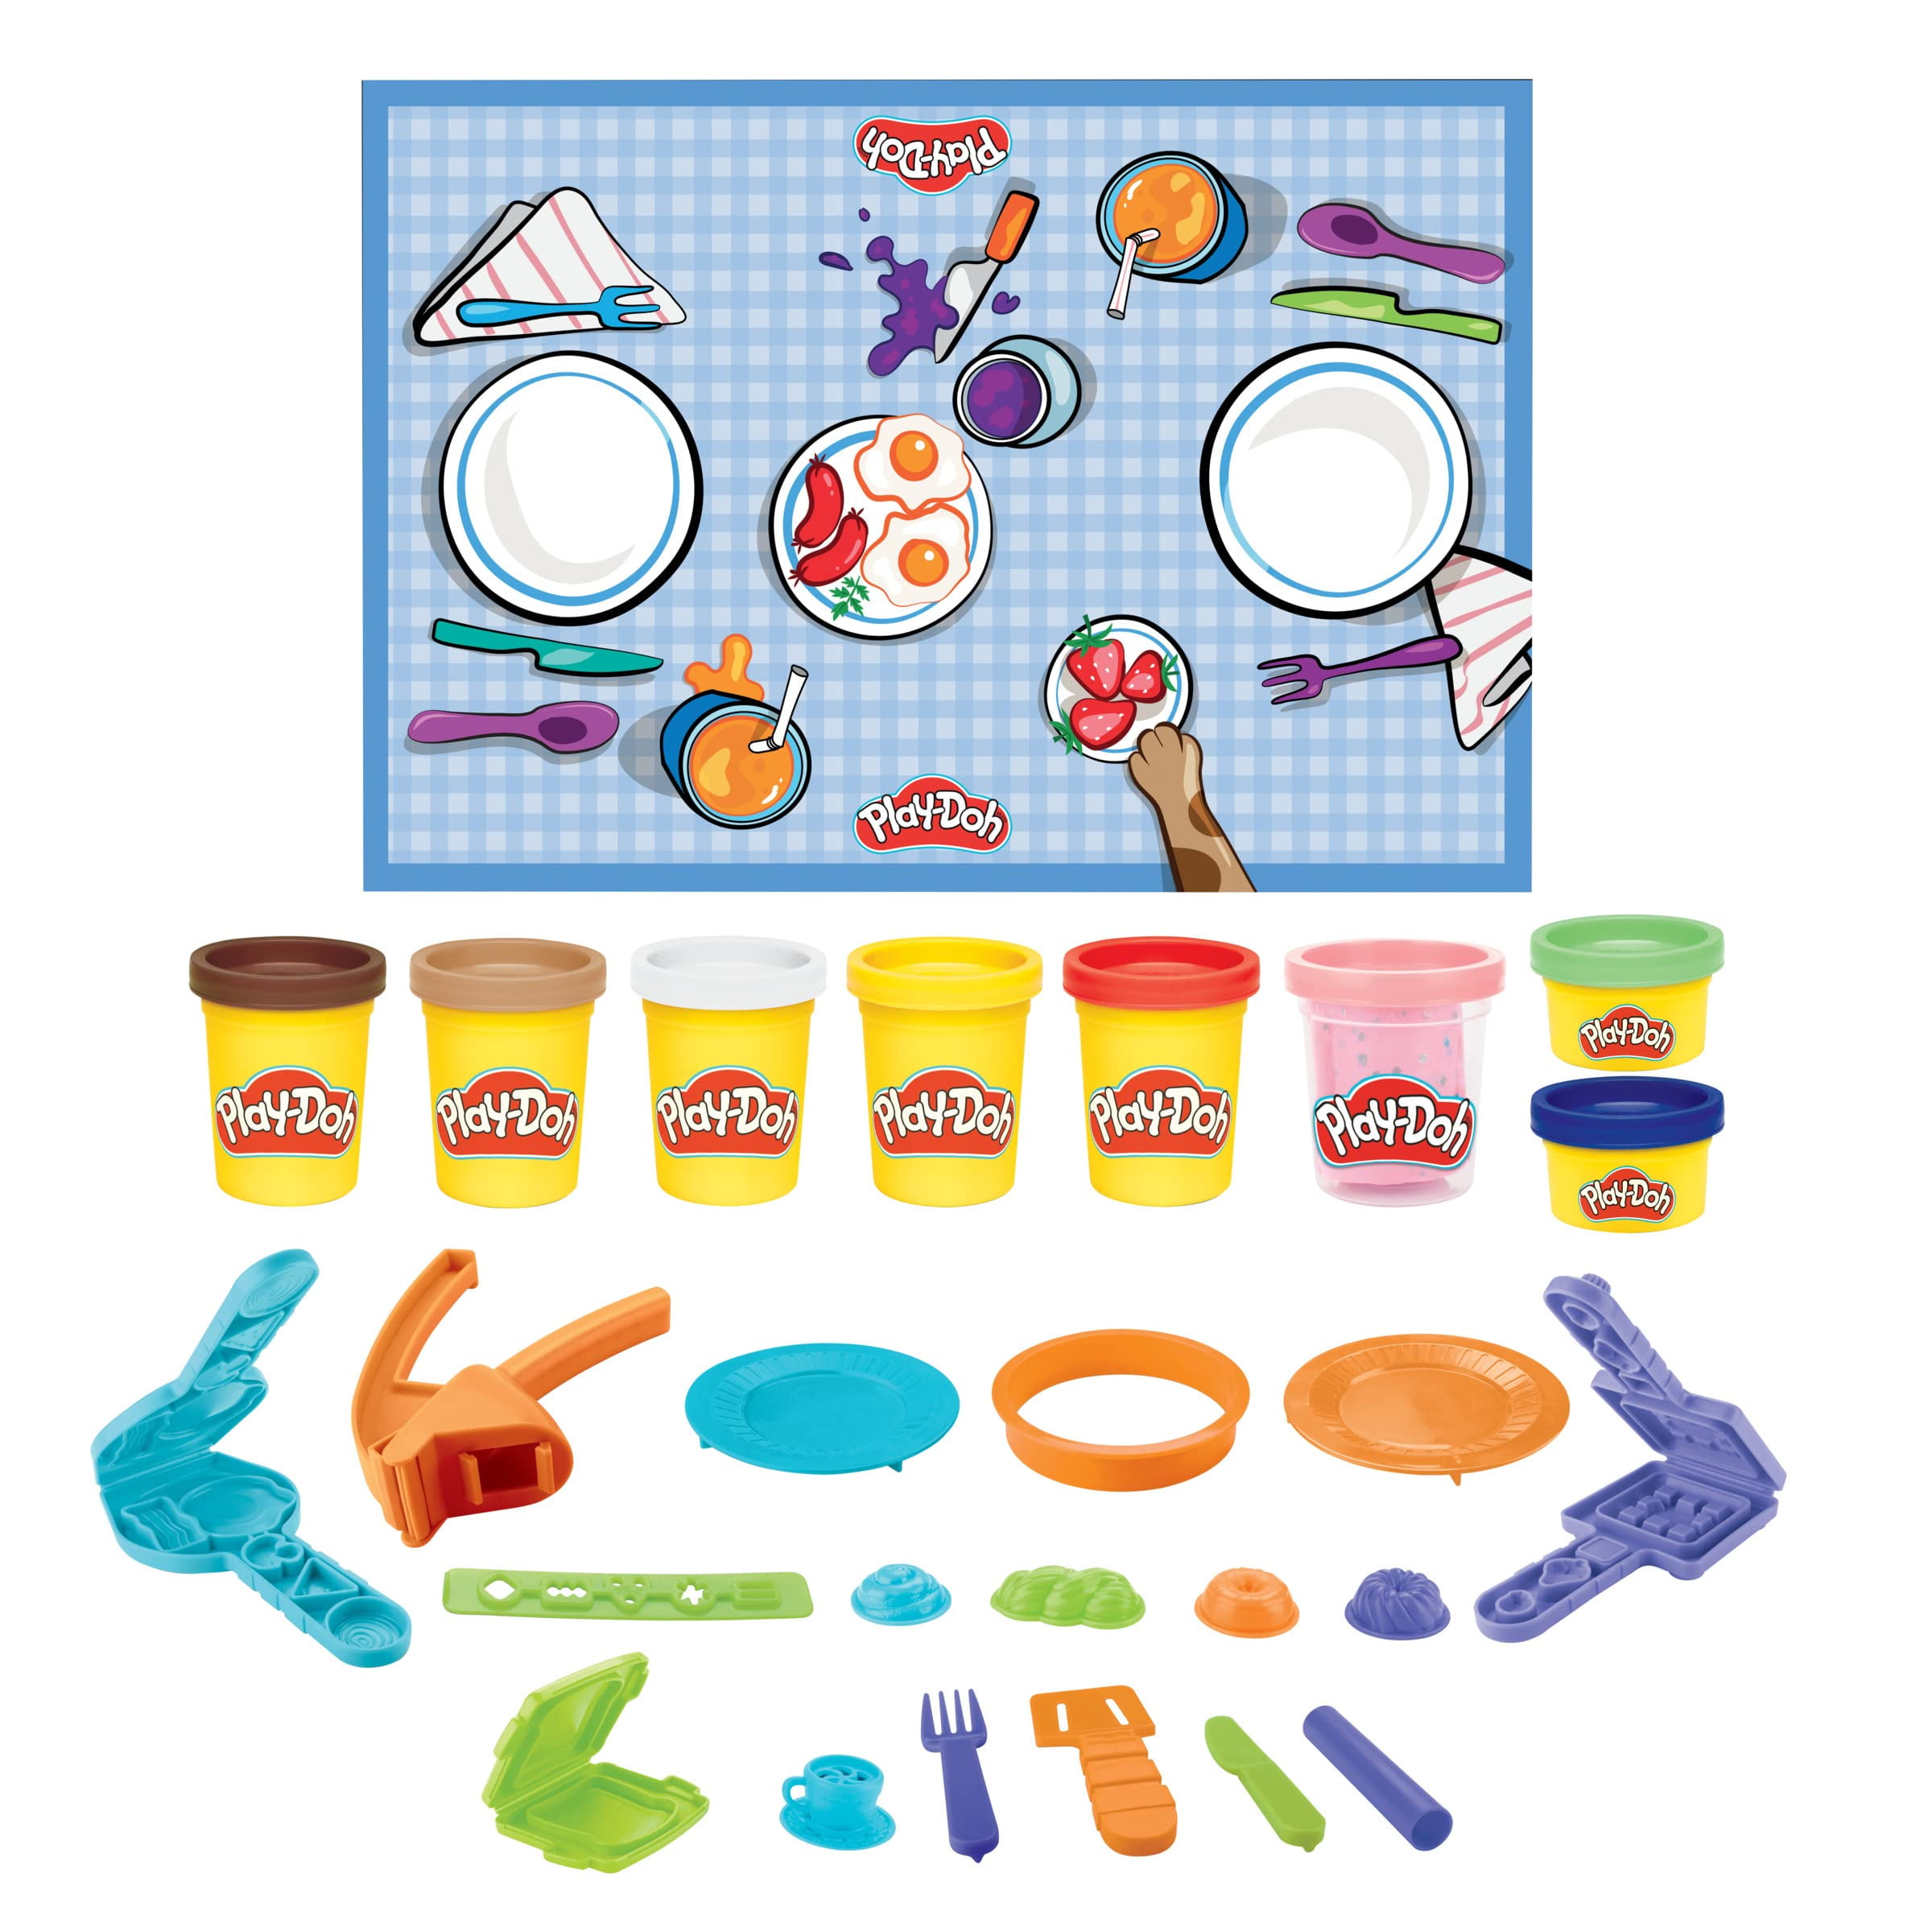 Play-doh Kitchen Creations Super Colourful Cafe Playset Wholesale